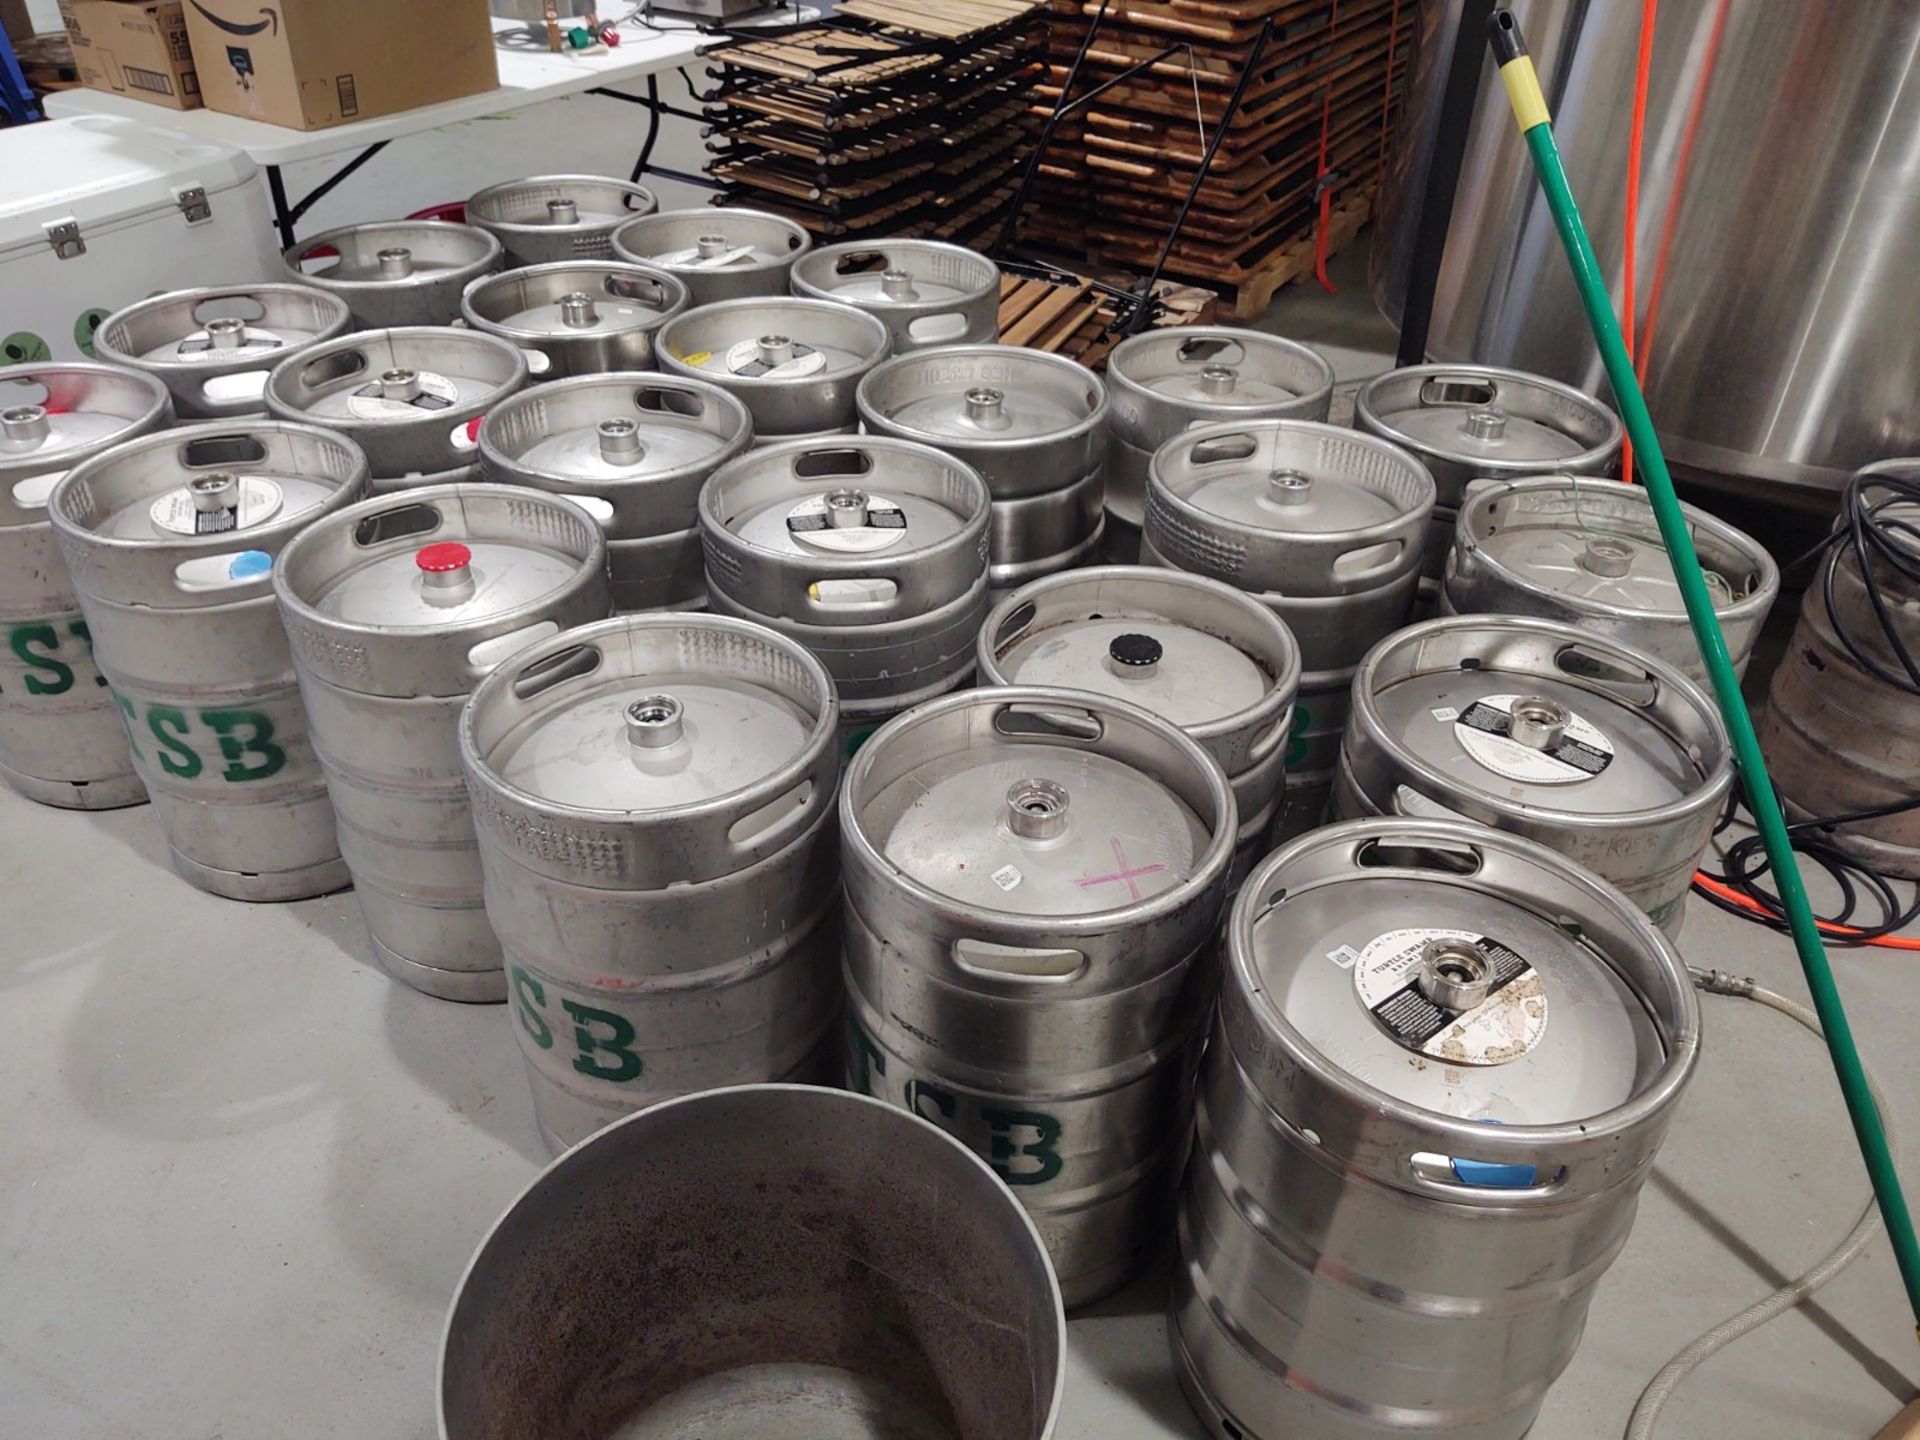 (10) 1/2 Barrel Kegs (ALL EMPTY) (BEING SOLD BY THE PIECE - QUANTITY x PRICE) - Image 2 of 2